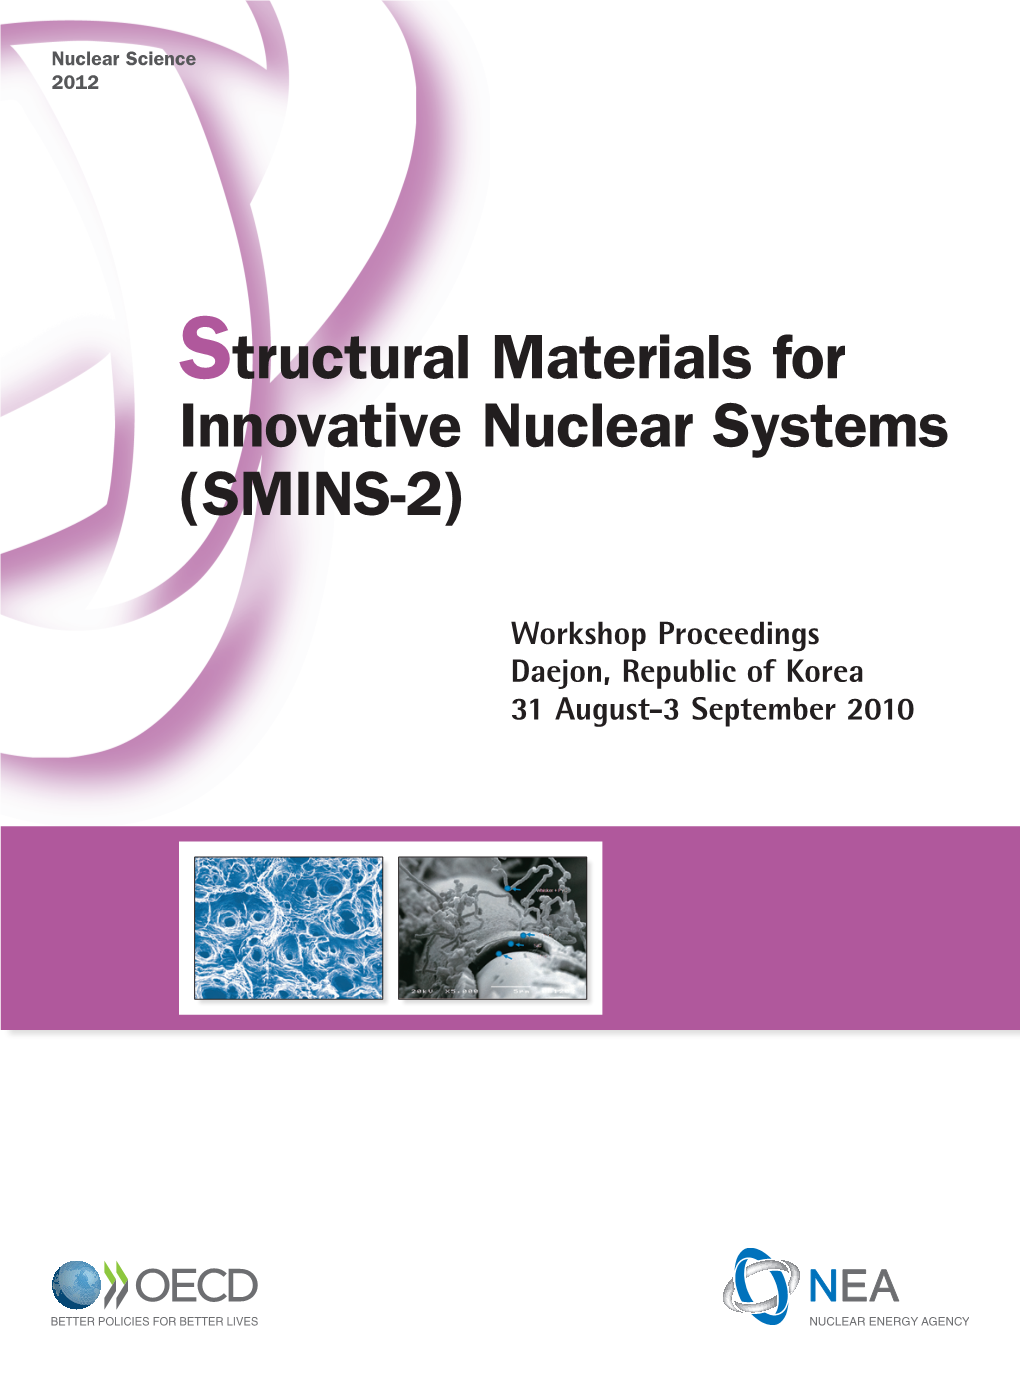 Structure Materials for Innovative Nuclear Systems (SMINS-2), Workshop Proceedings, Daejon, Republic of Korea, 31 August-3Septem